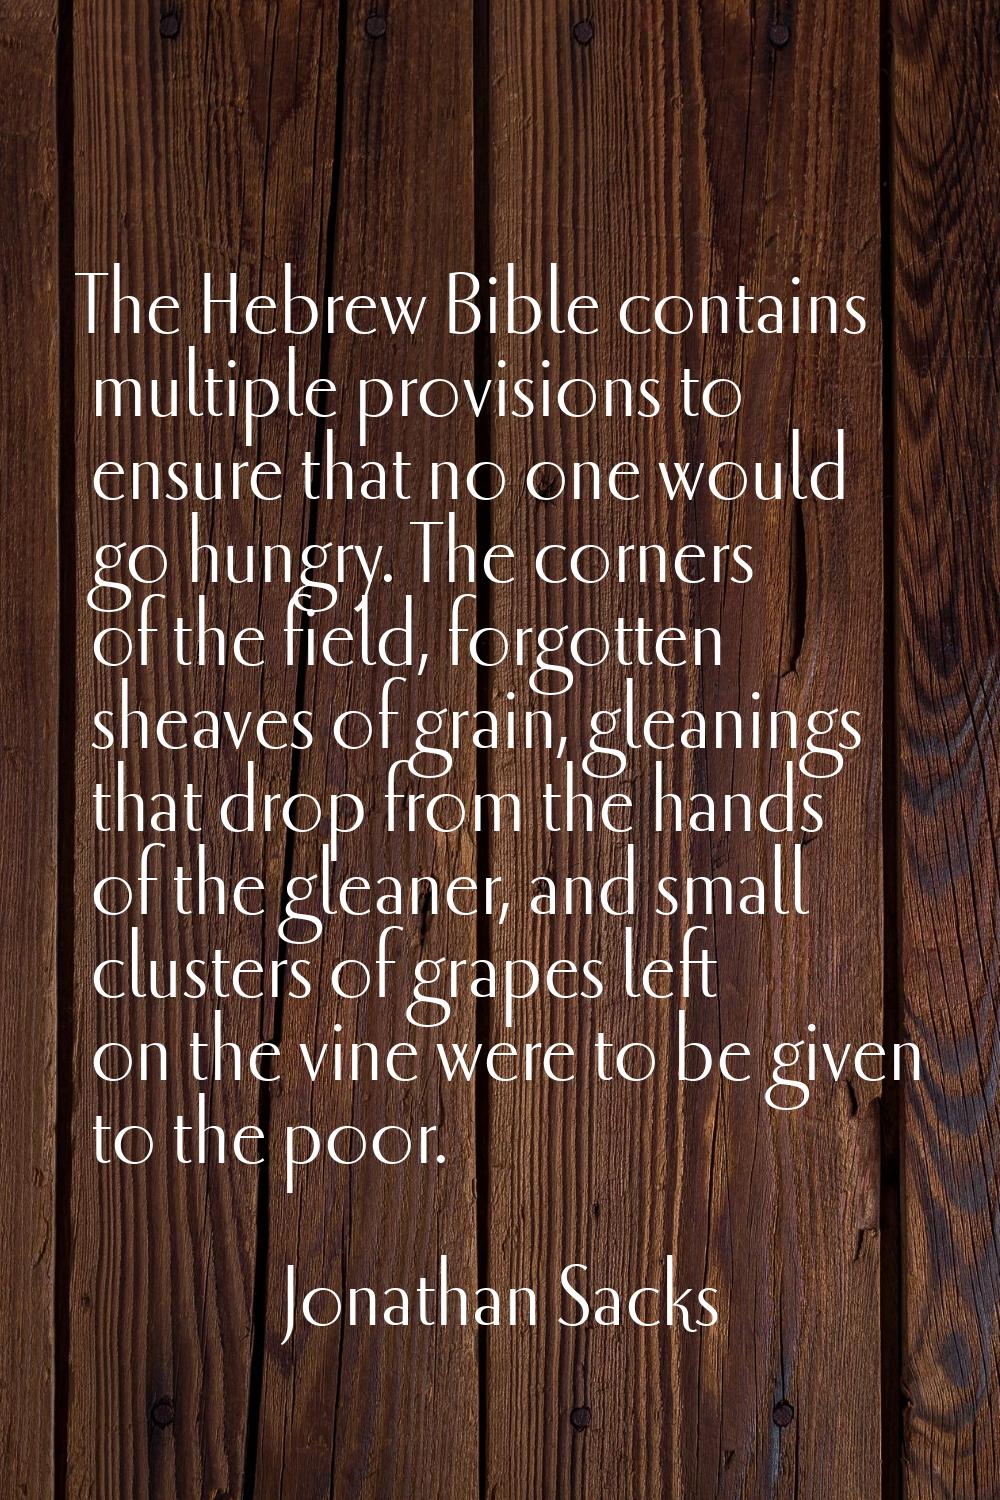 The Hebrew Bible contains multiple provisions to ensure that no one would go hungry. The corners of